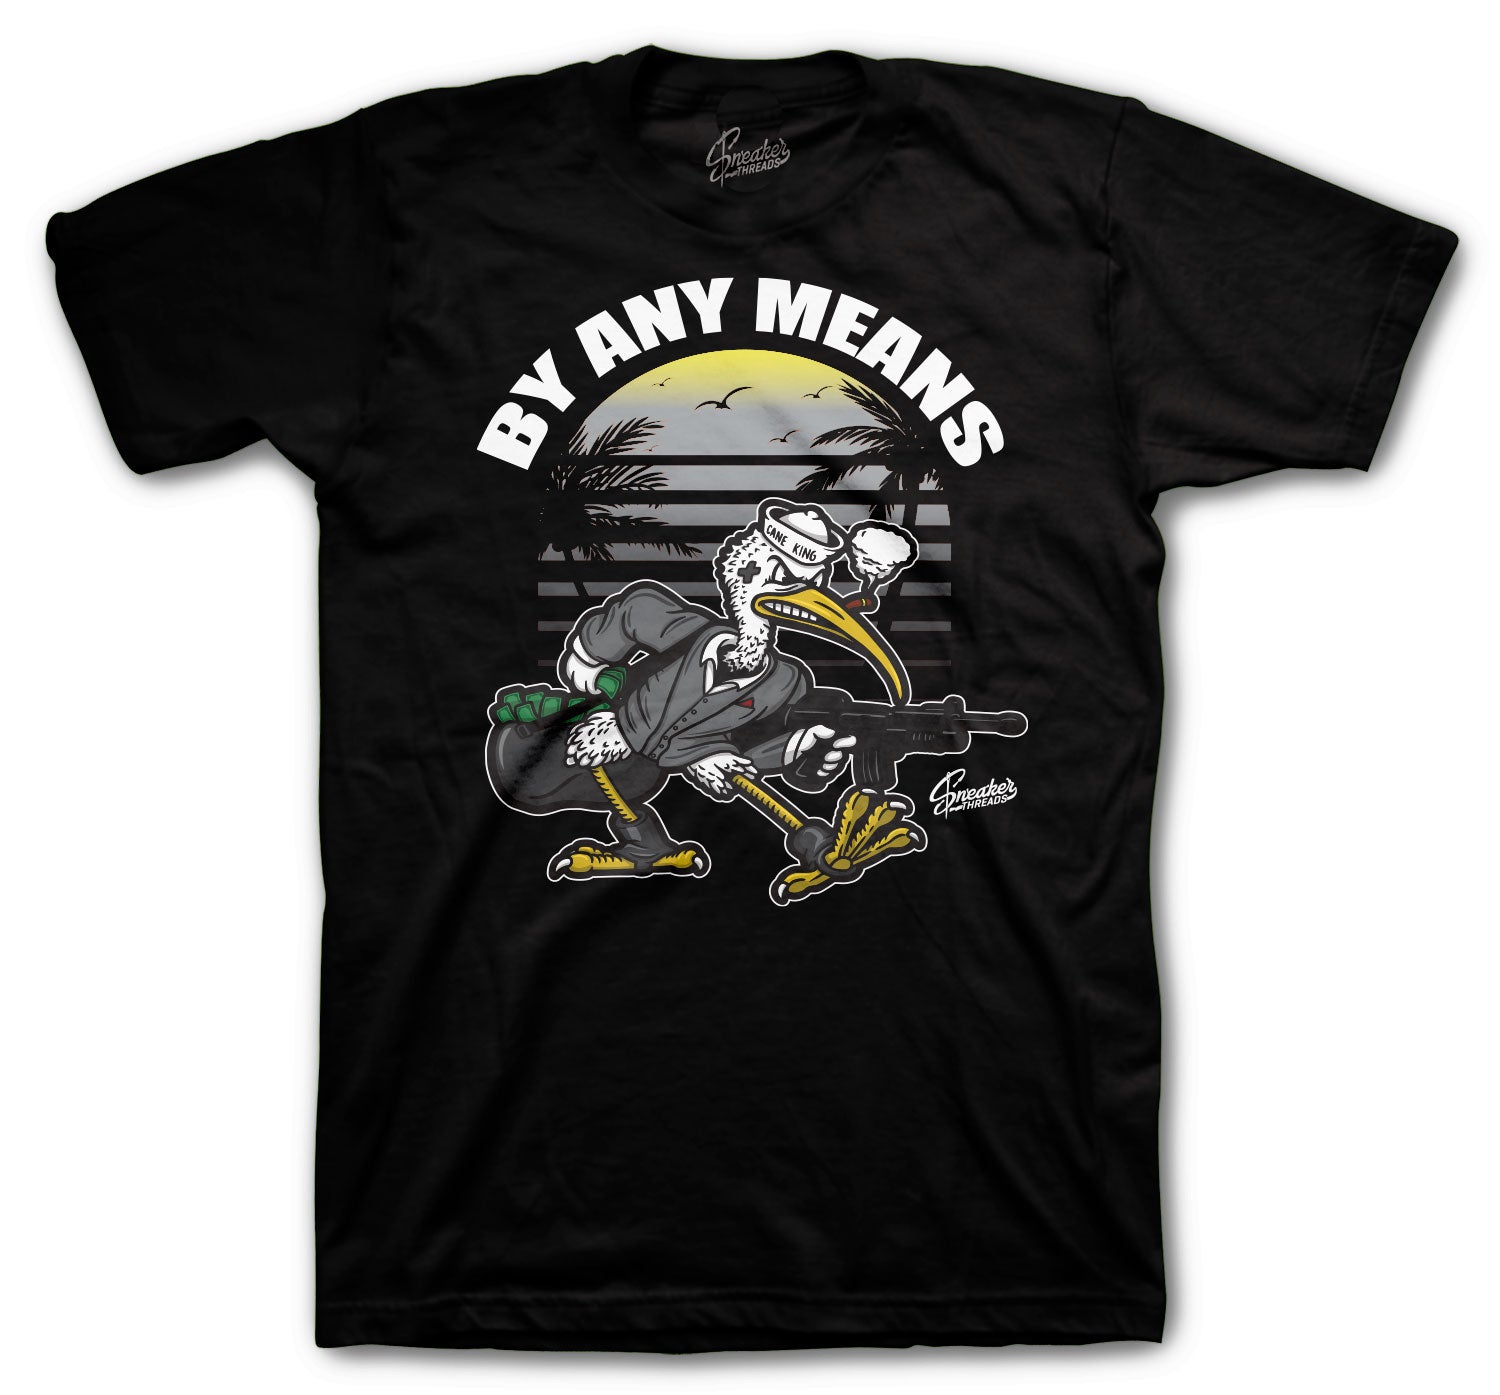 Retro 5 Anthracite Shirt - By Any Means - Black